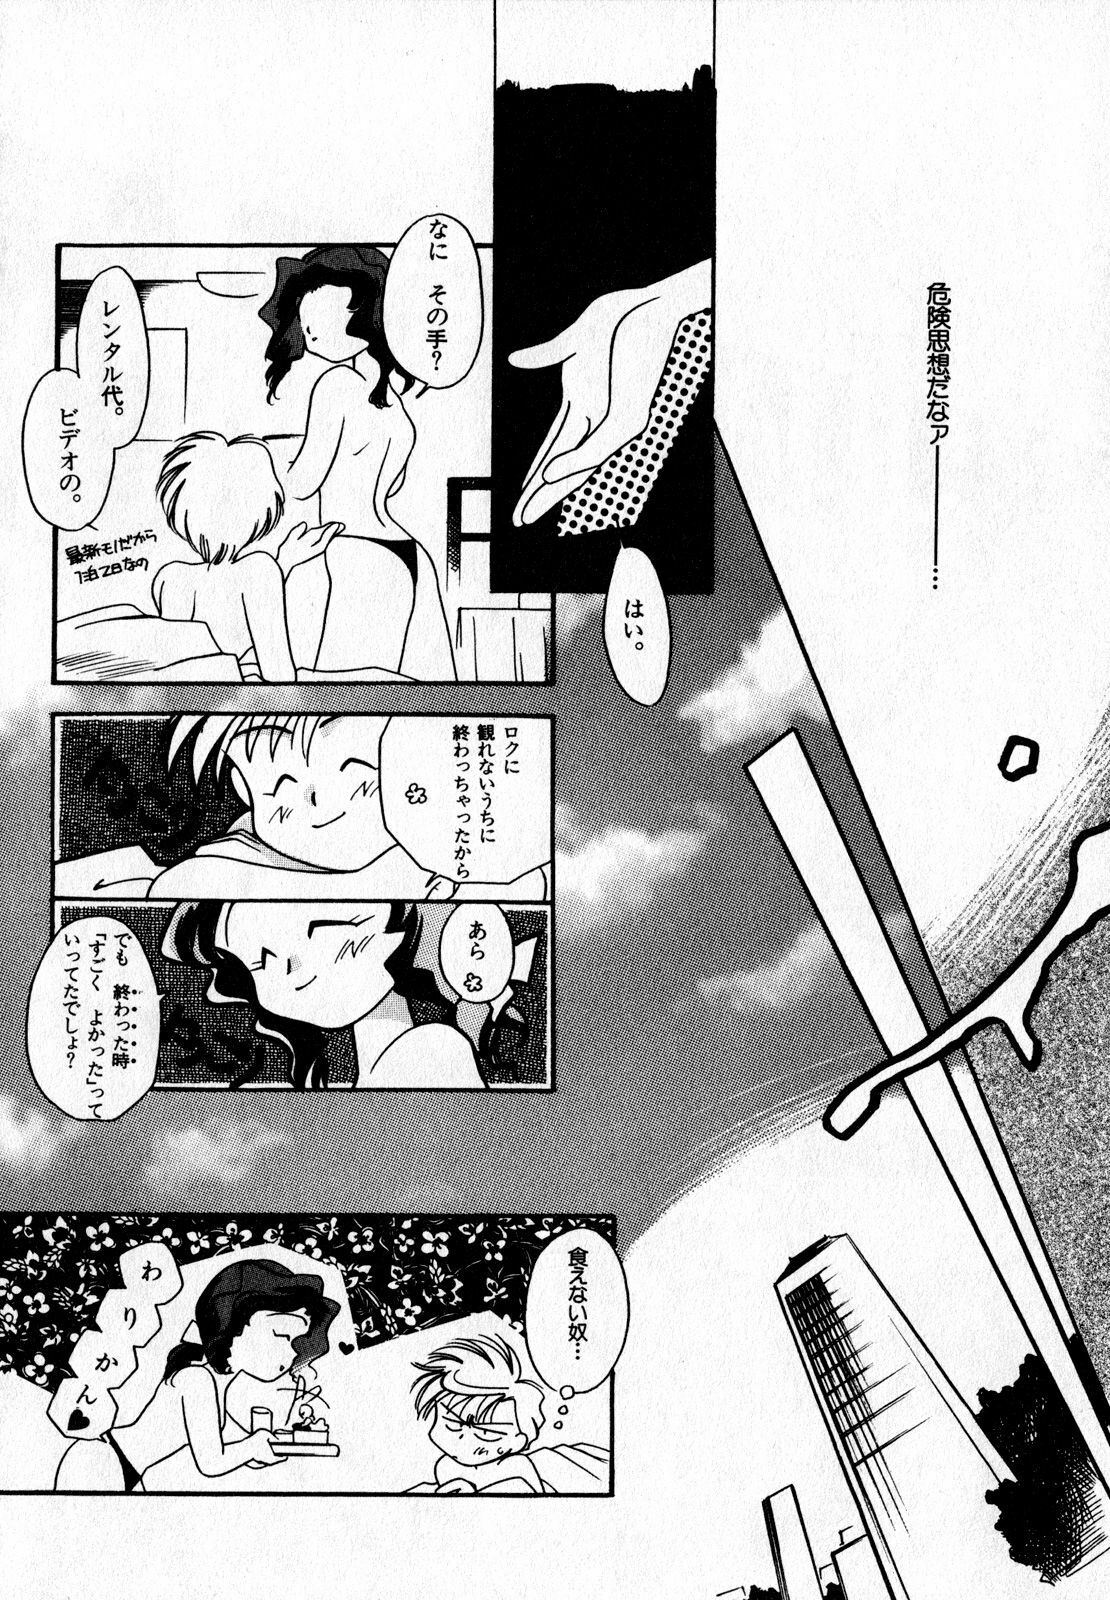 [Anthology] Lunatic Party 7 (Sailor Moon) page 25 full